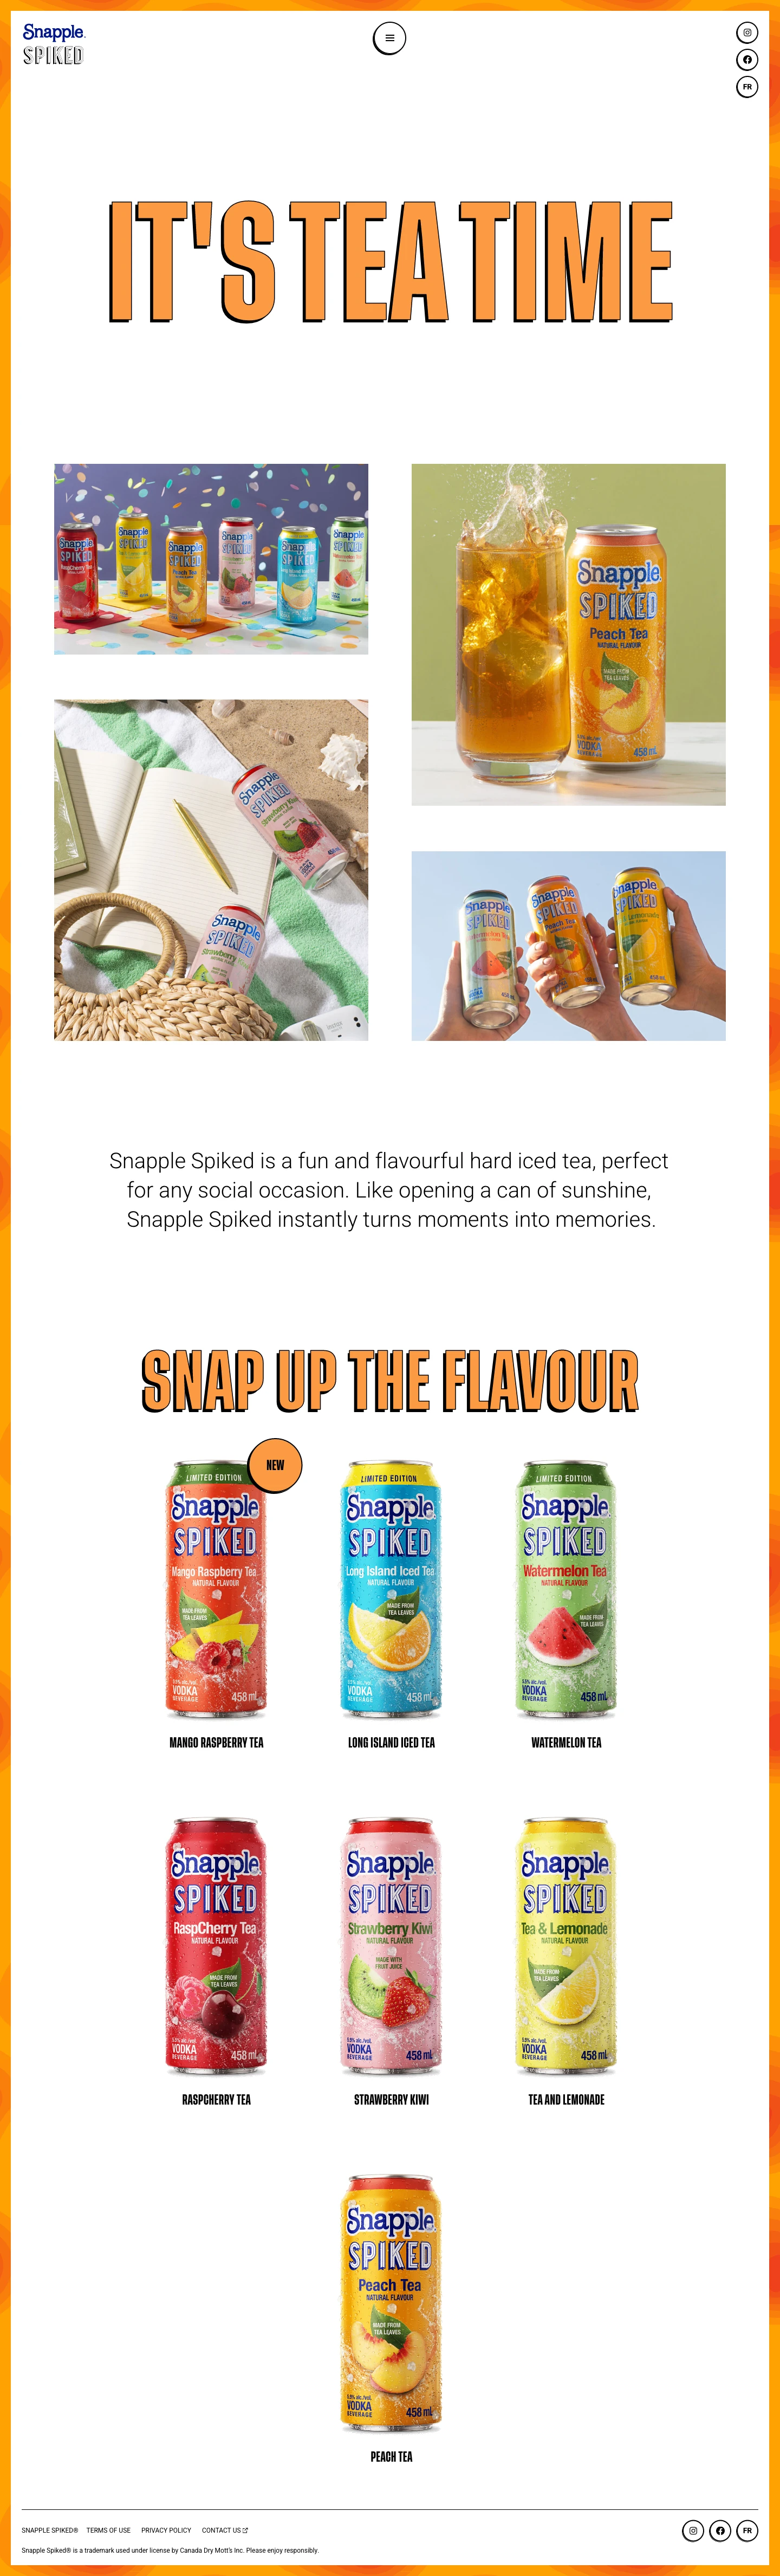 Snapple Spiked Landing Page Example: Tea & refreshing fruit flavours mixed with vodka- what more could you want?